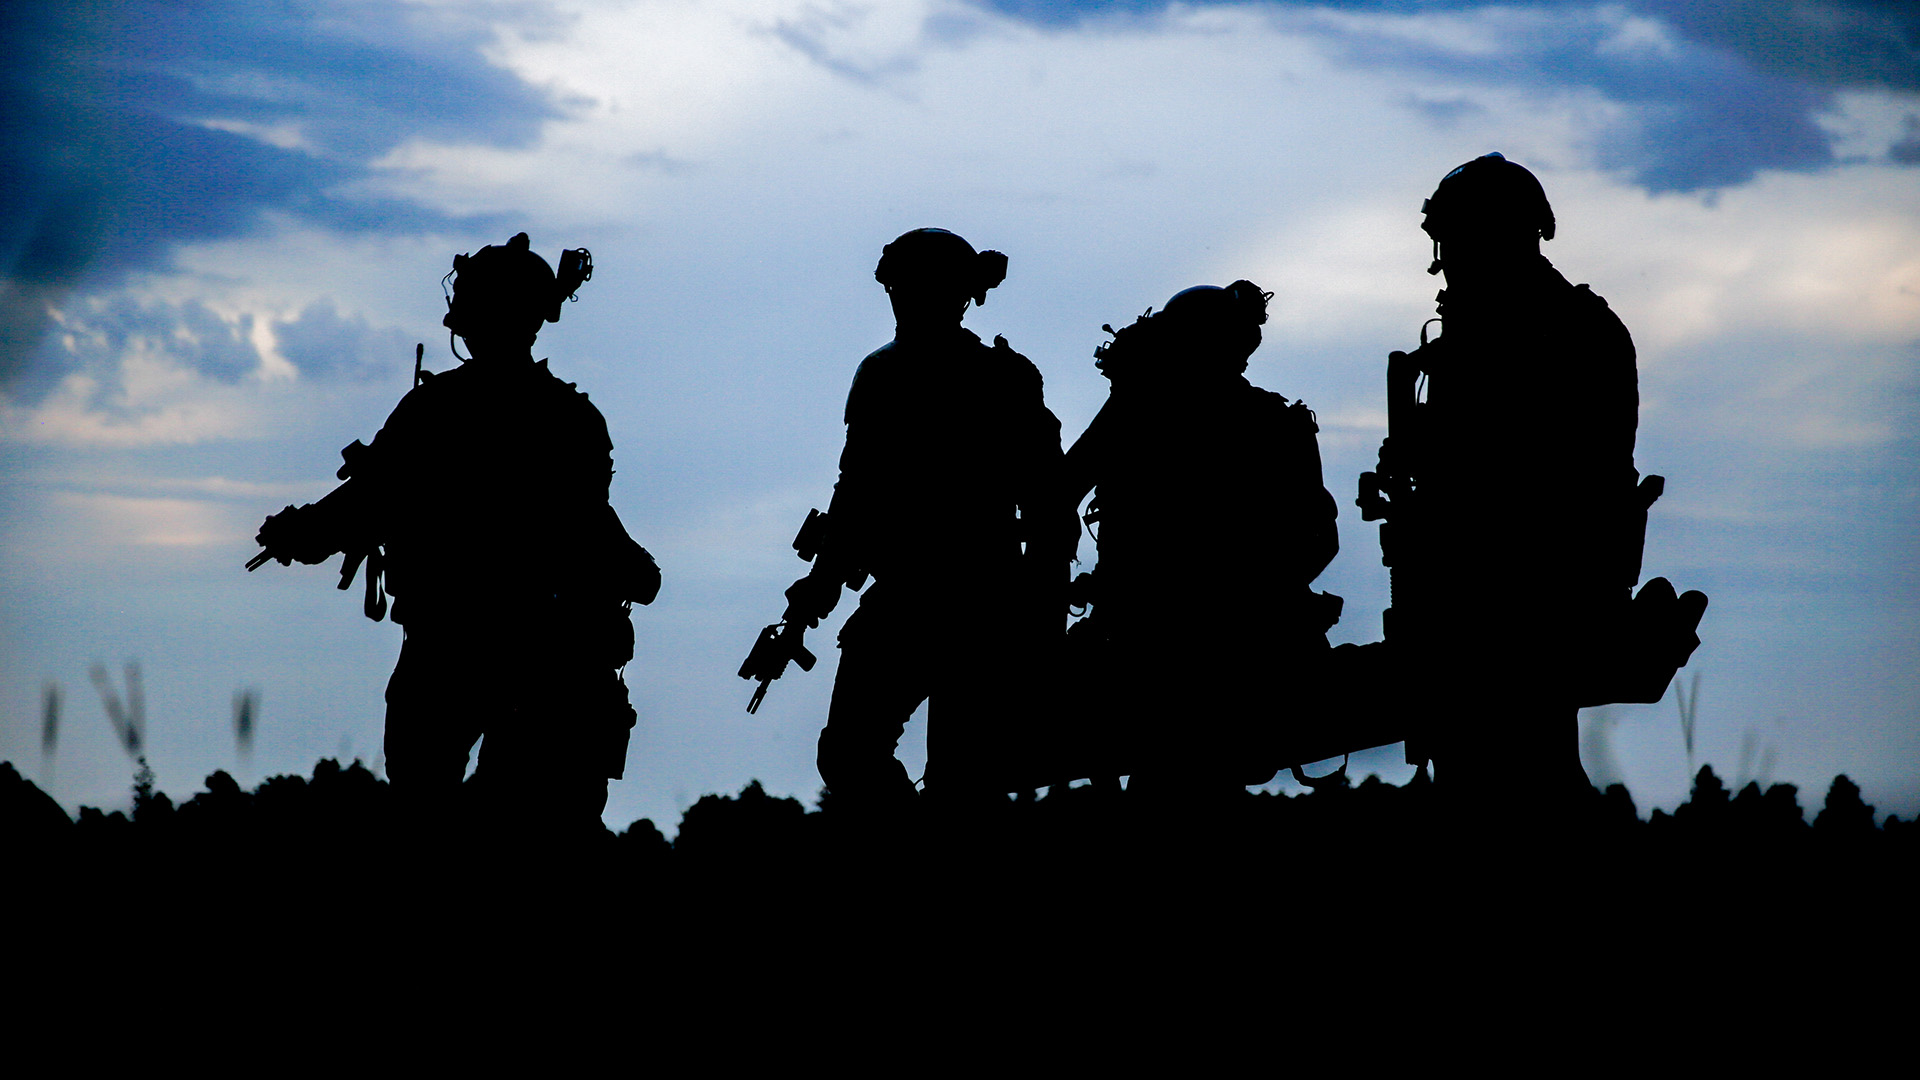 Soldiers silhouettes.